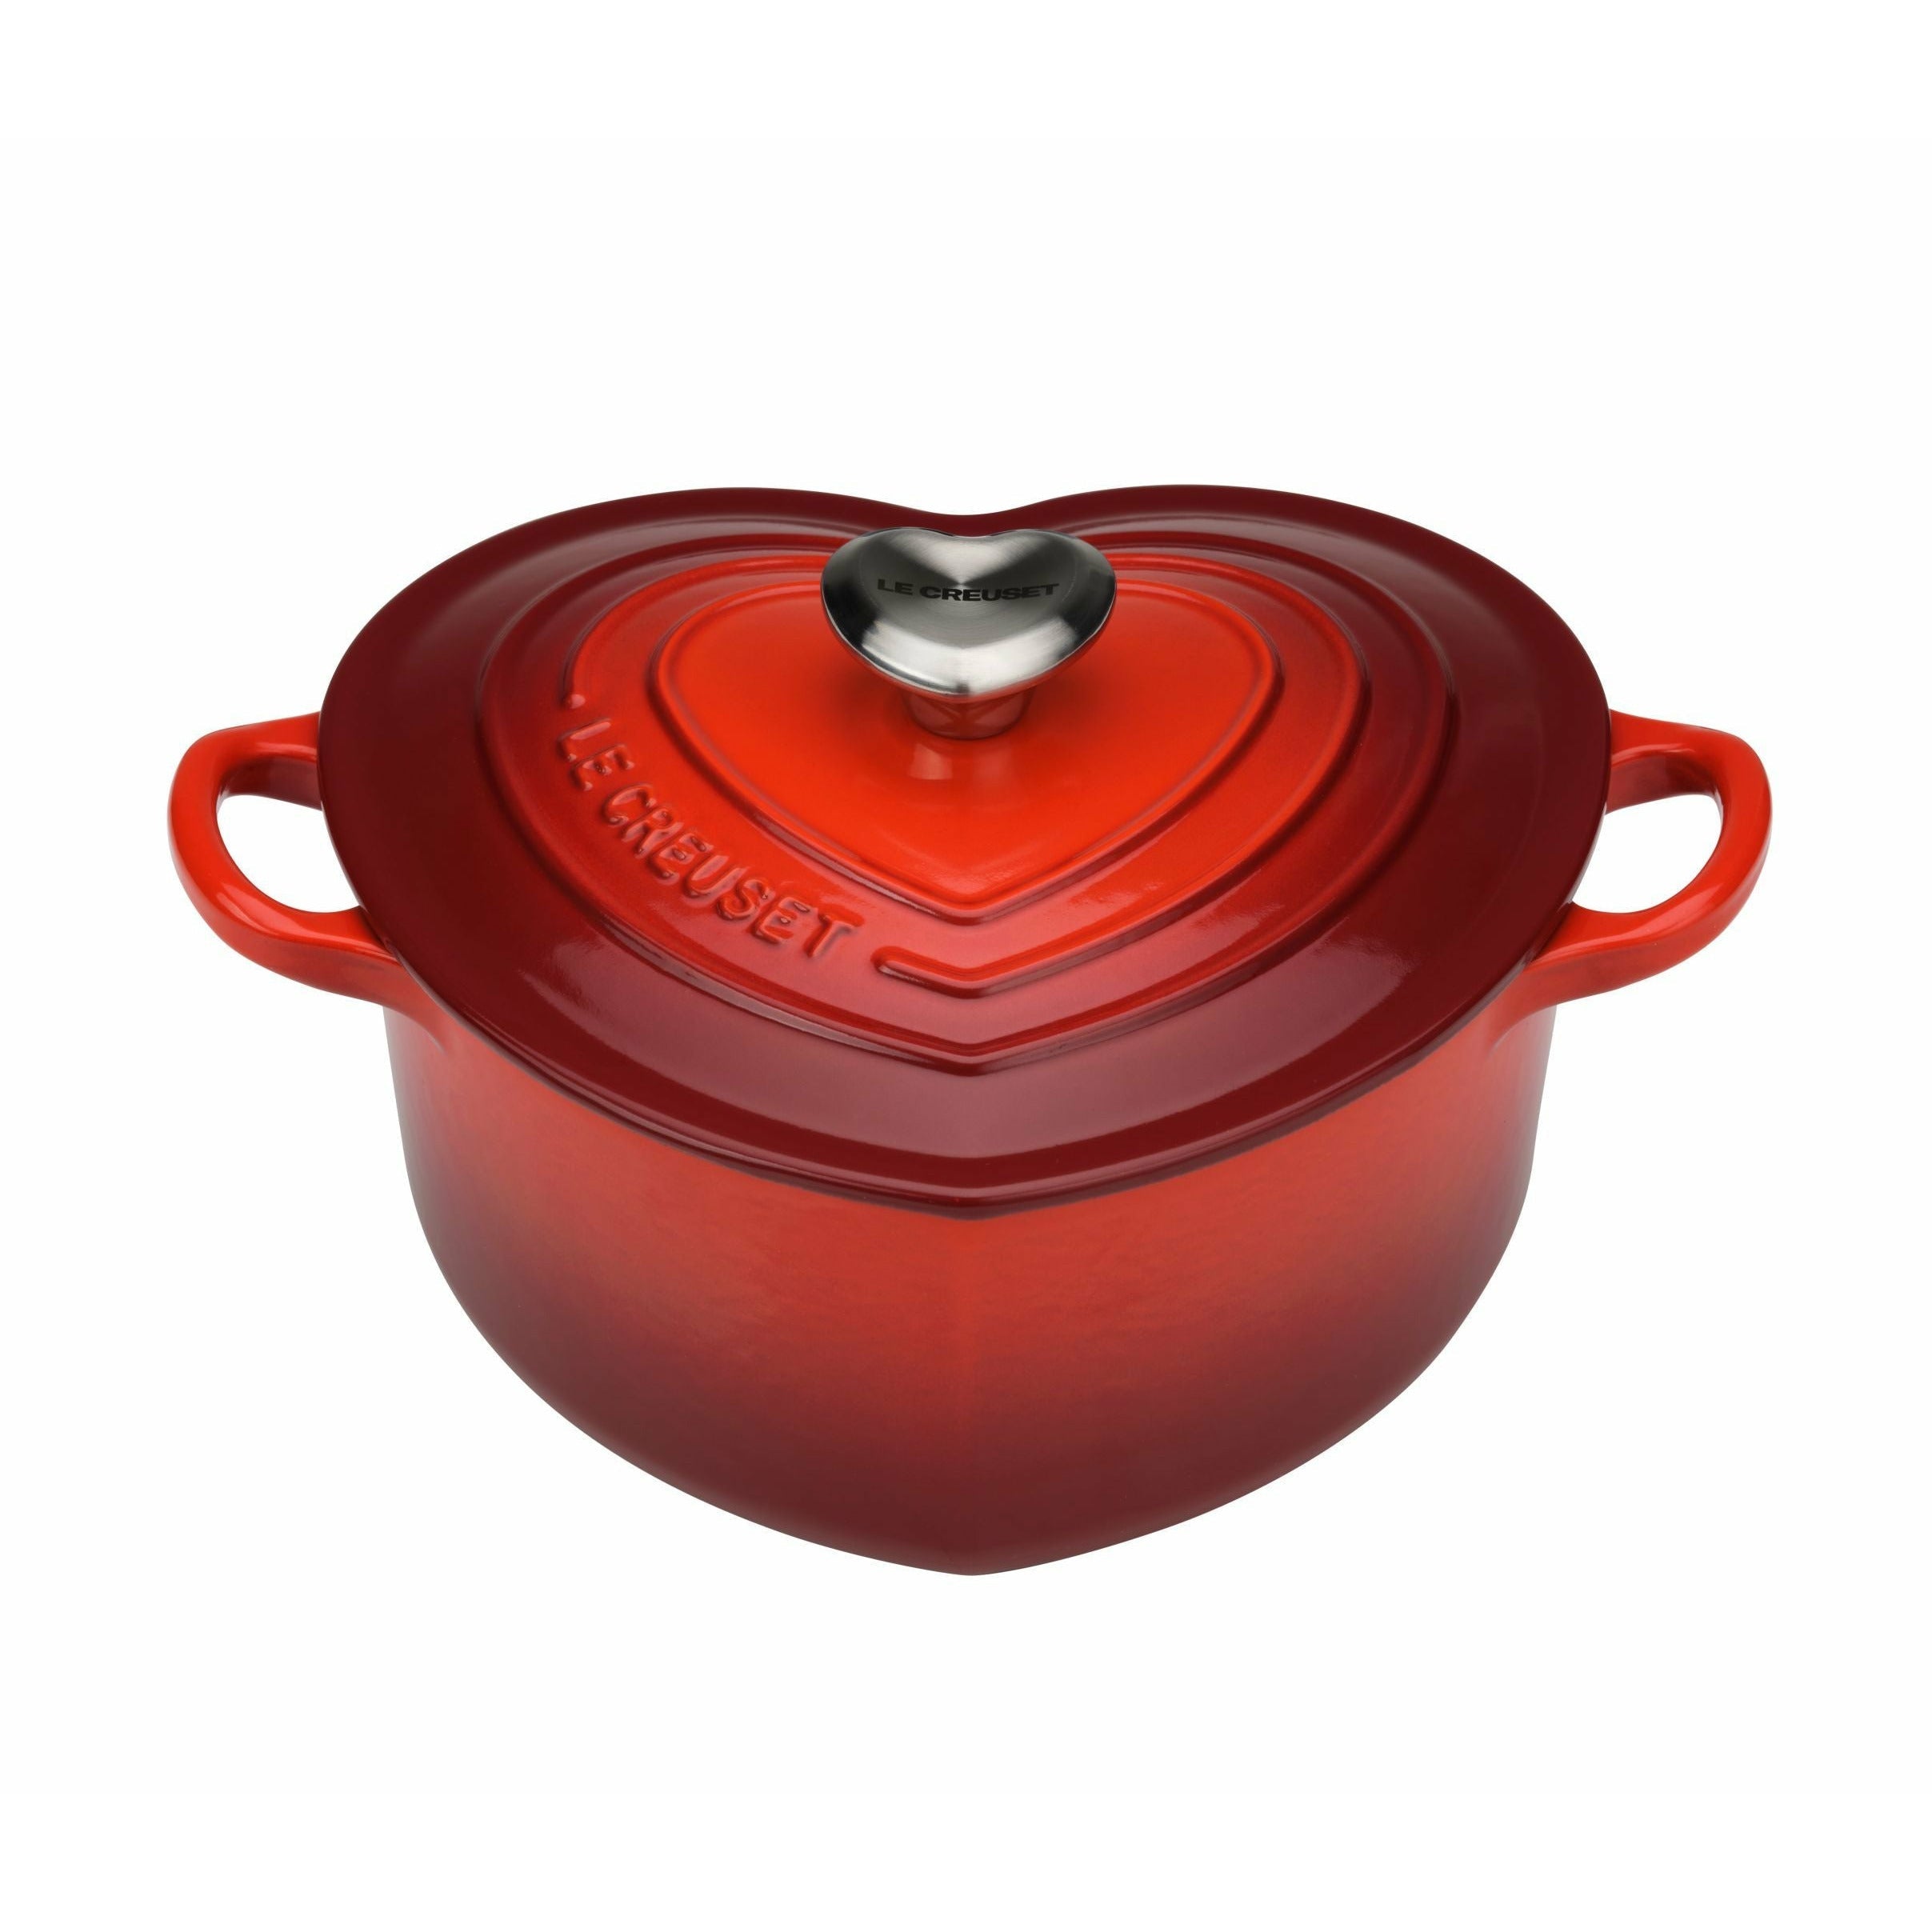 Le Creuset Tradition Heart Roaster With Heart Button 20 Cm, Cherry Red